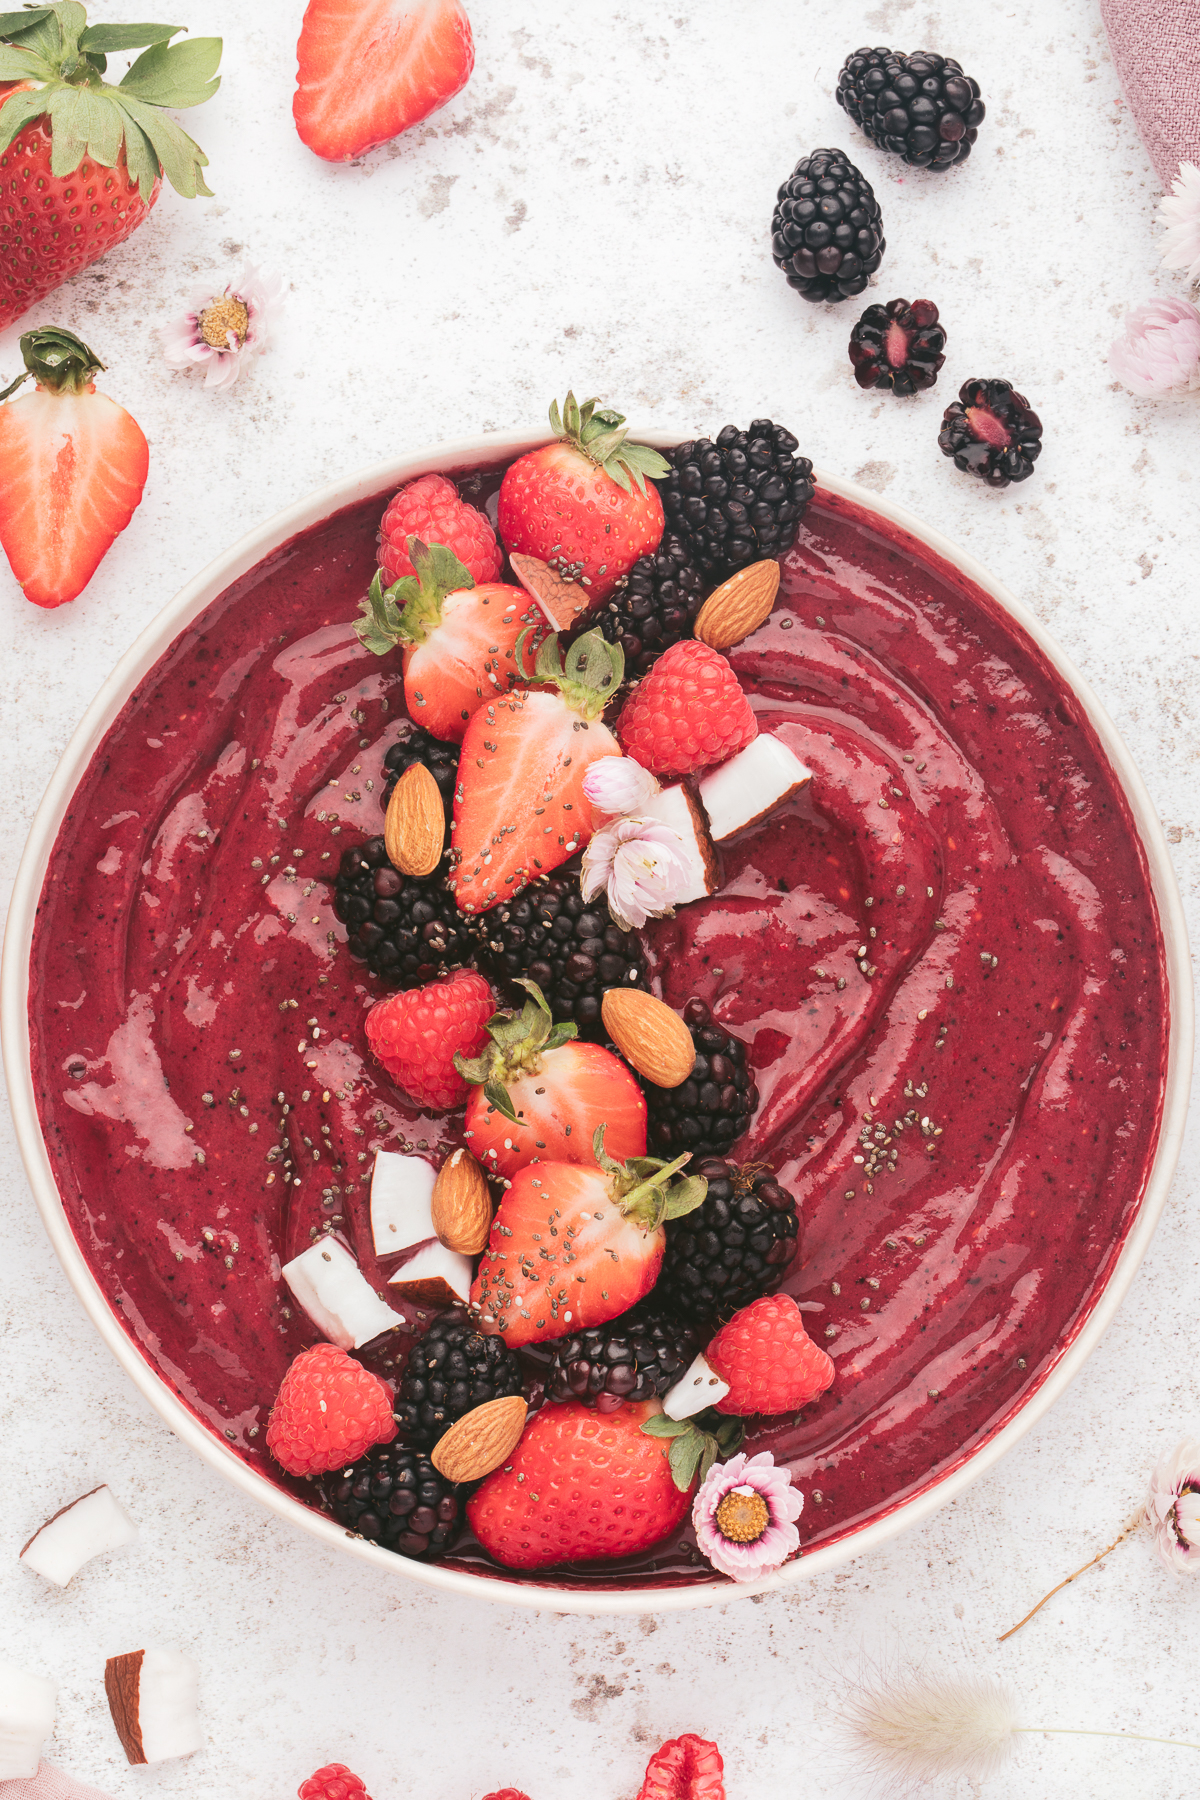 Berry Smoothie Bowl is a delicious and nutritious way to start your day. It's creamy, refreshing, and you can add whatever toppings you like!  